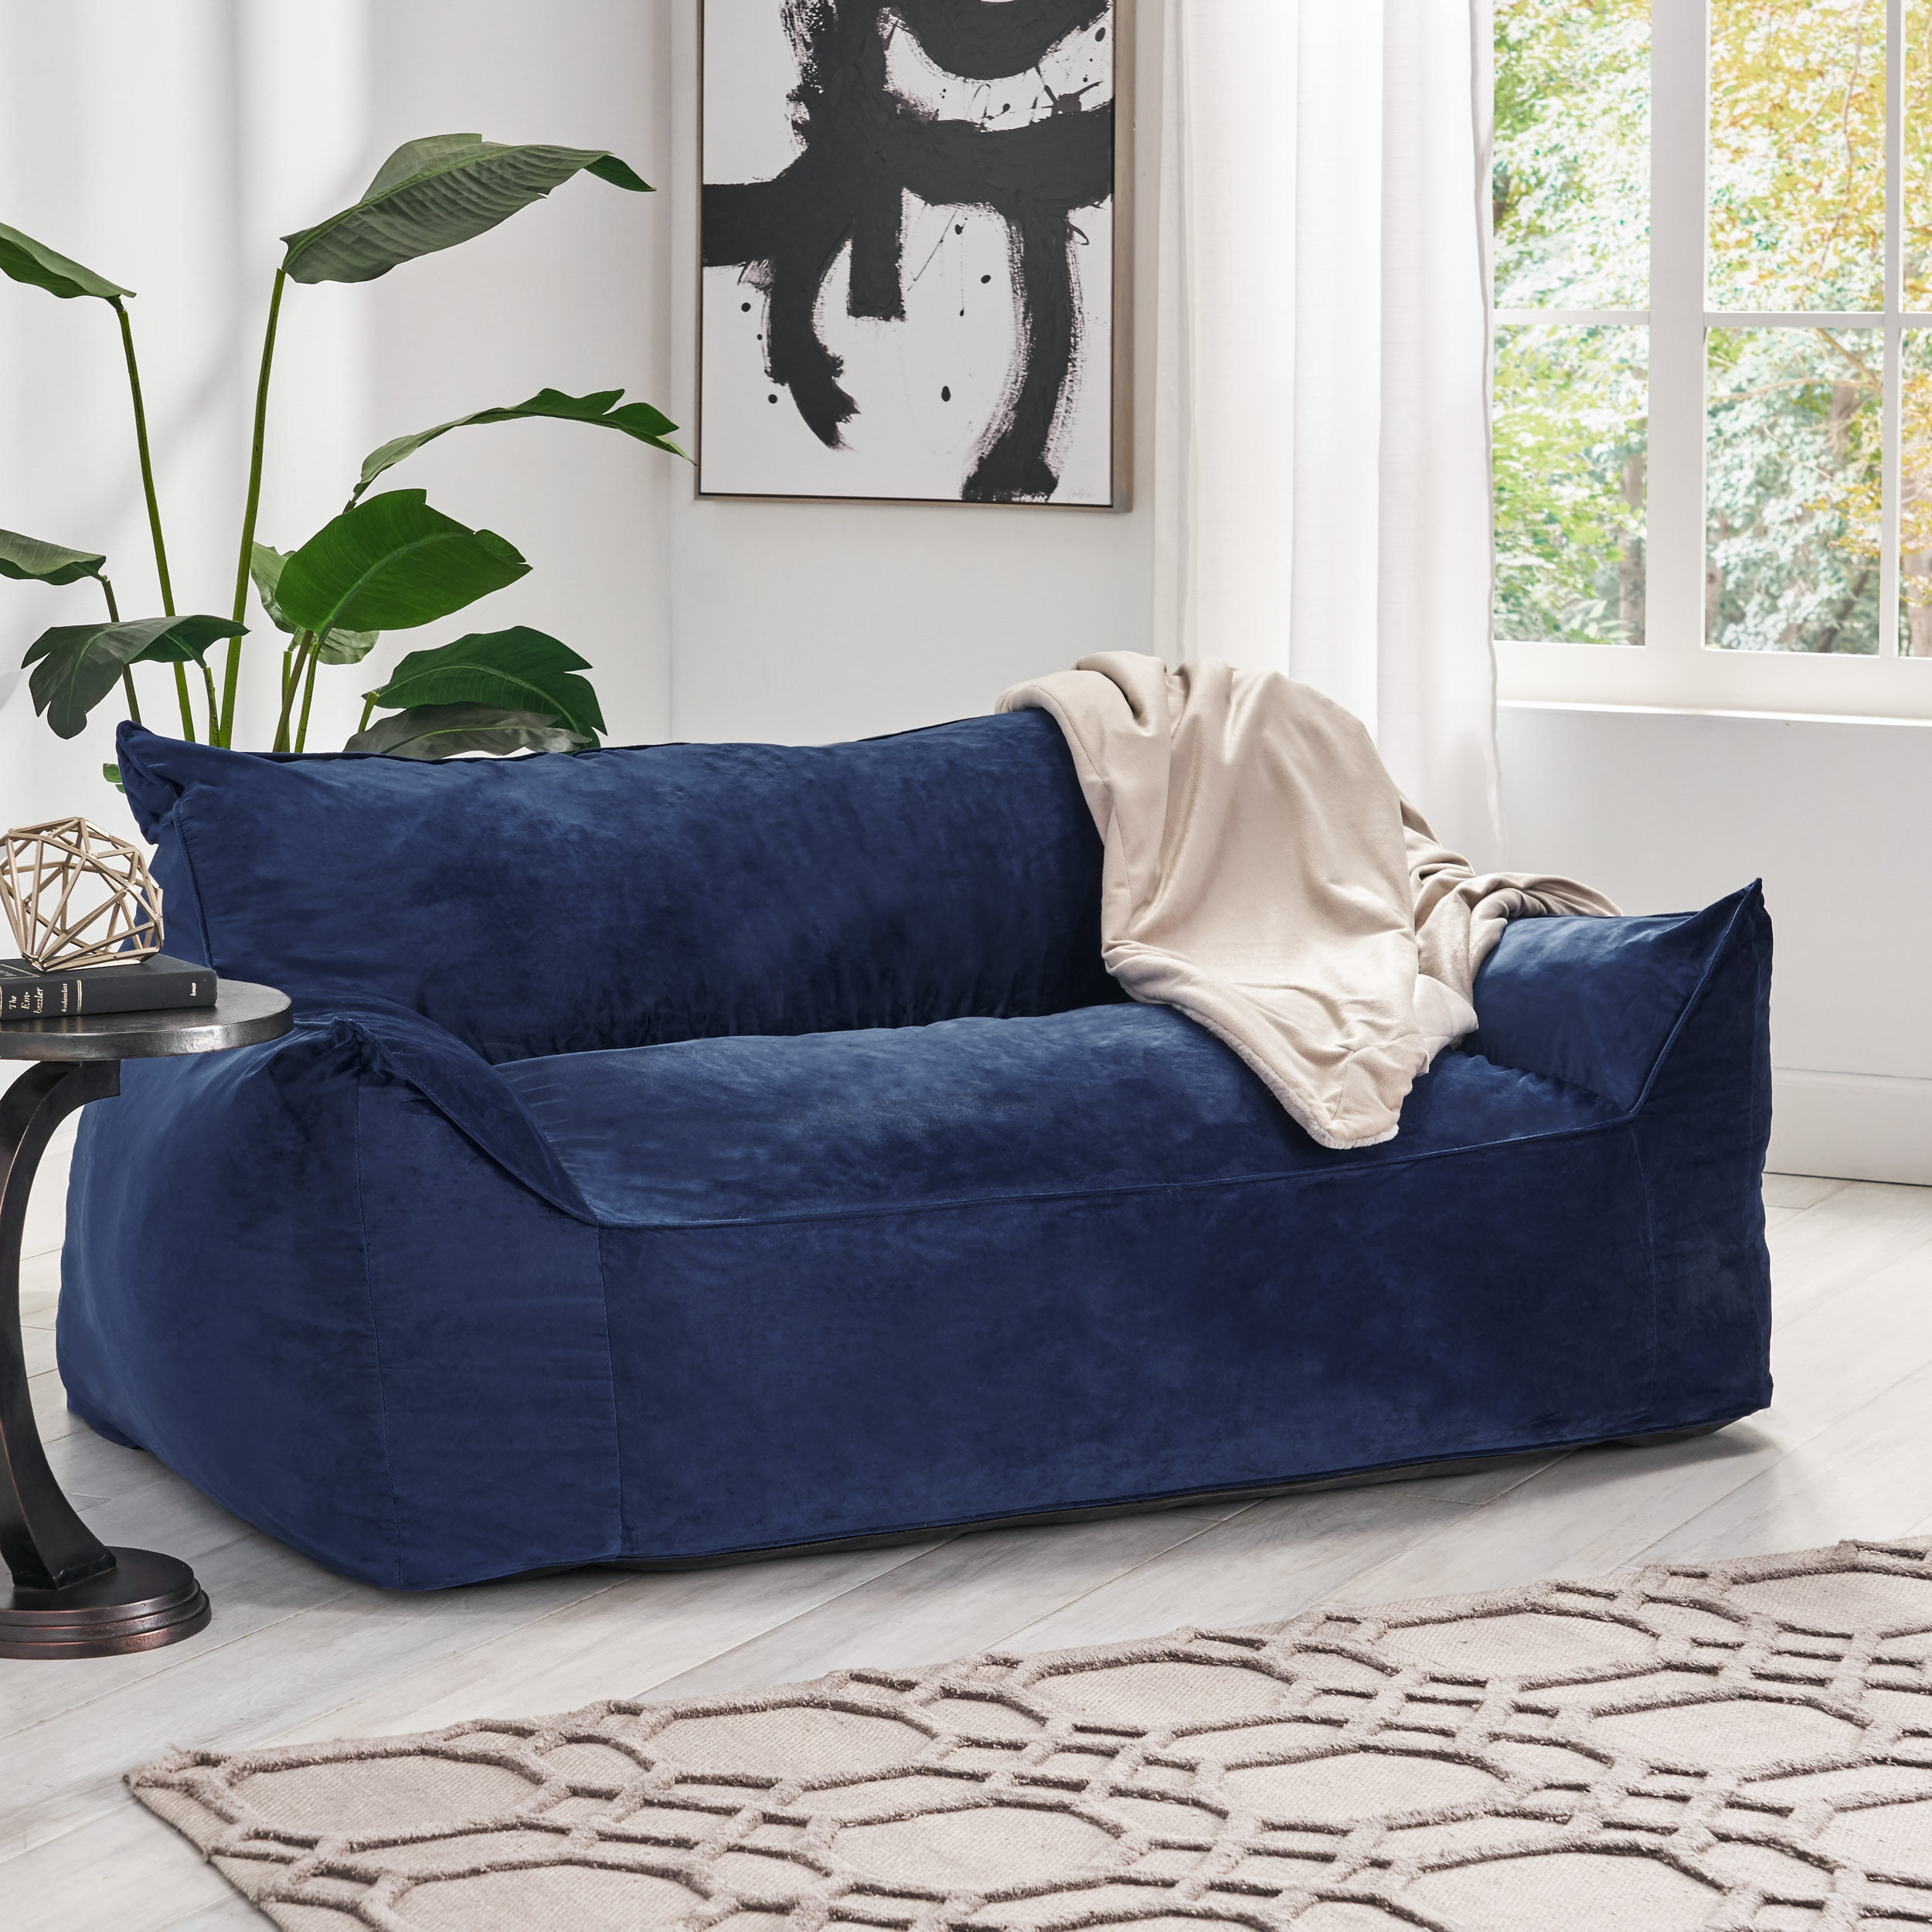 Buy Sky Blue Organic Premium Velvet Bean Bag Cover with Beans Online in  India at Best Price  Modern Bean Bags  Living Room Furniture  Furniture   Wooden Street Product